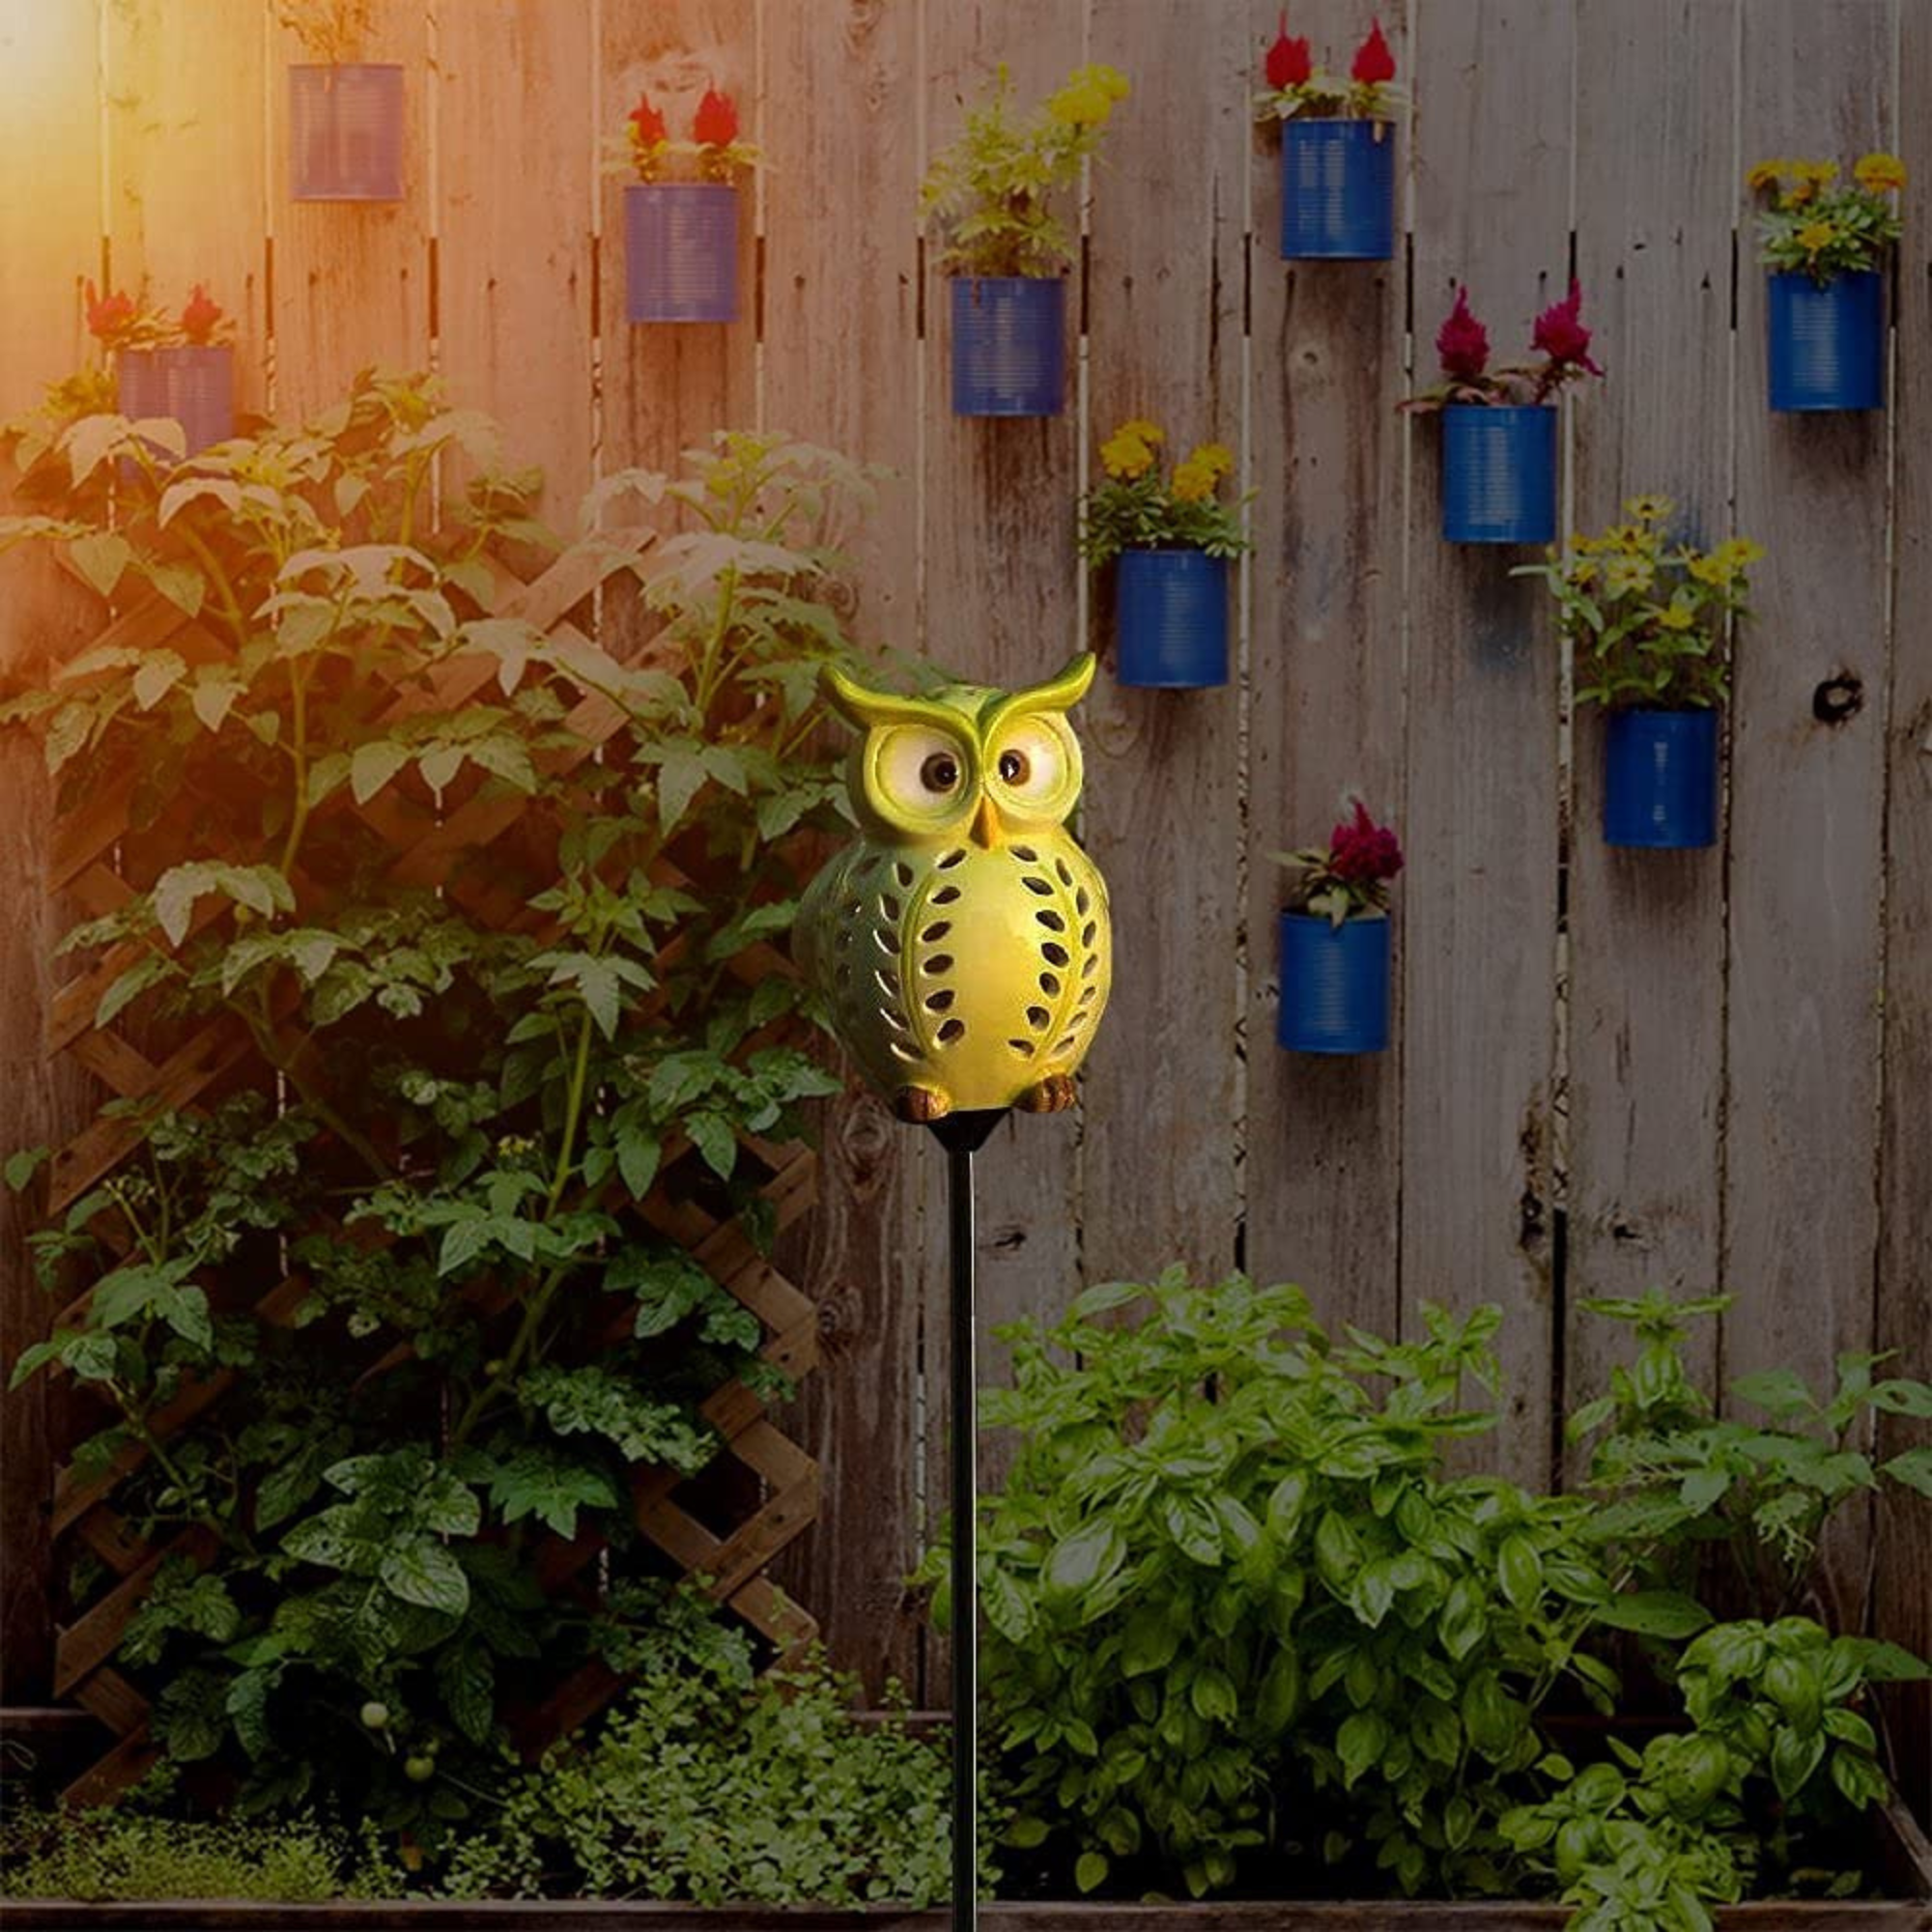 Cute Little Owl Garden Decoration, Best Solar Owl Stake And Solar Owl Light, Ceramic Owl Scarecrow Garden Decor For Your Lawn and Garden - image 2 of 8